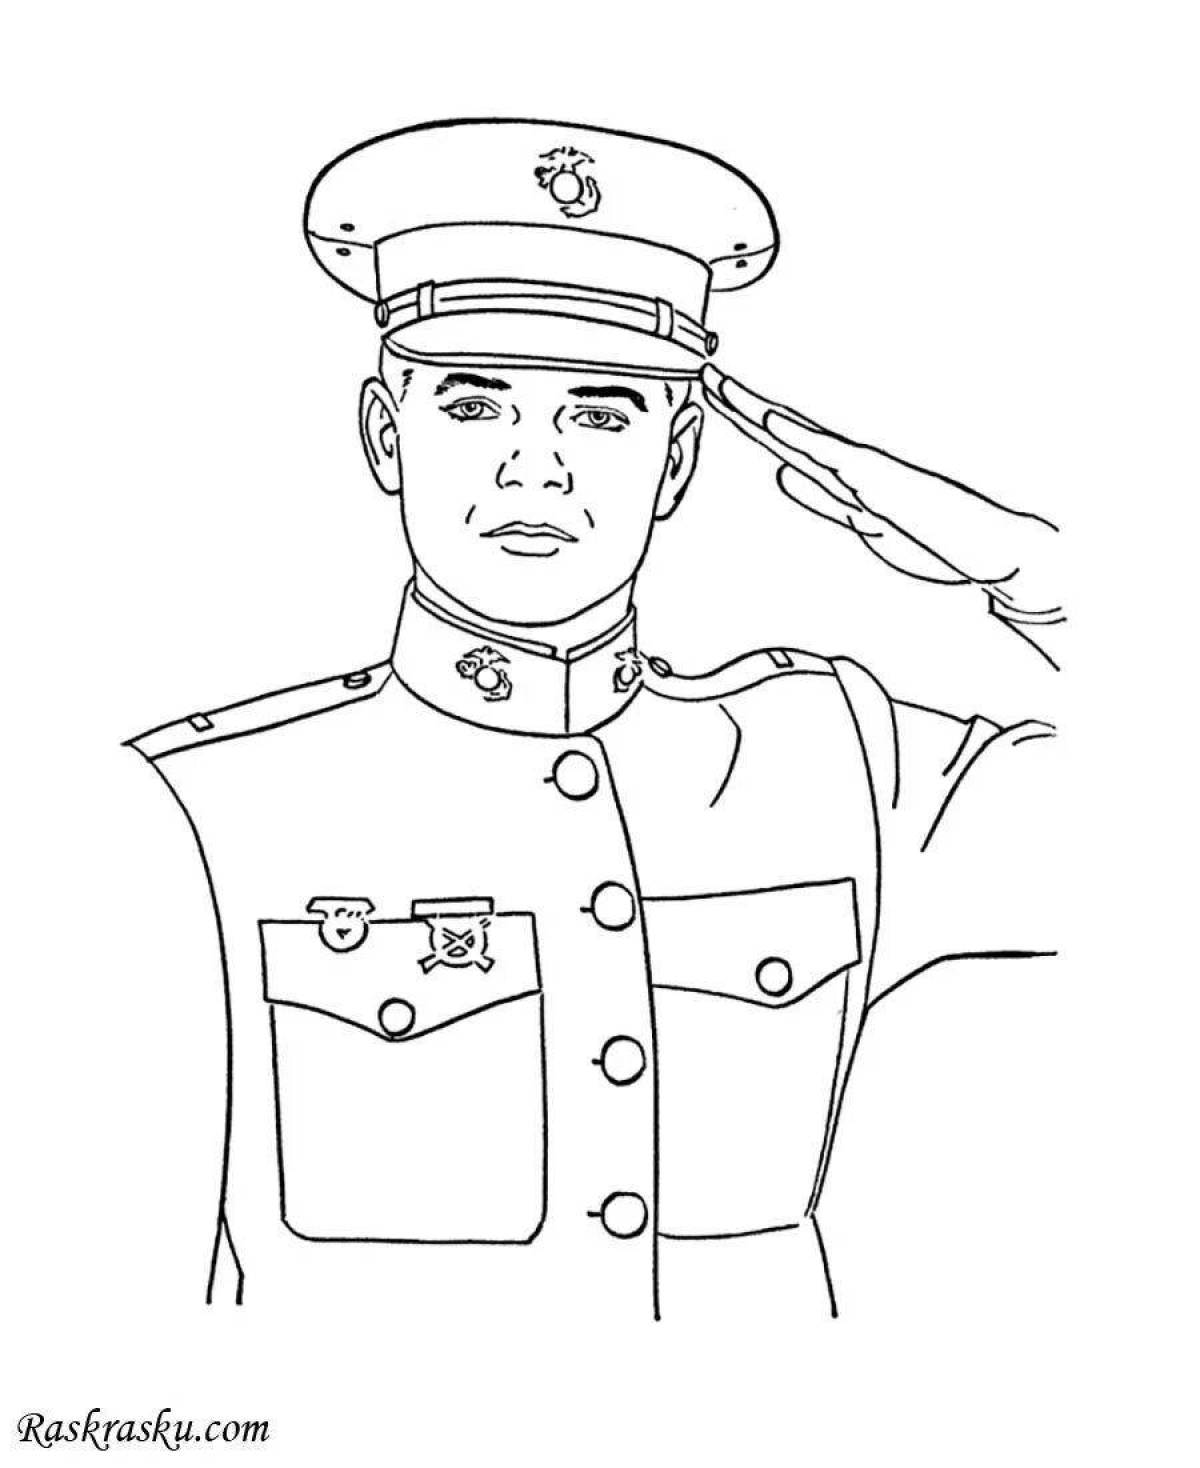 Coloring page grandiose ussr soldier